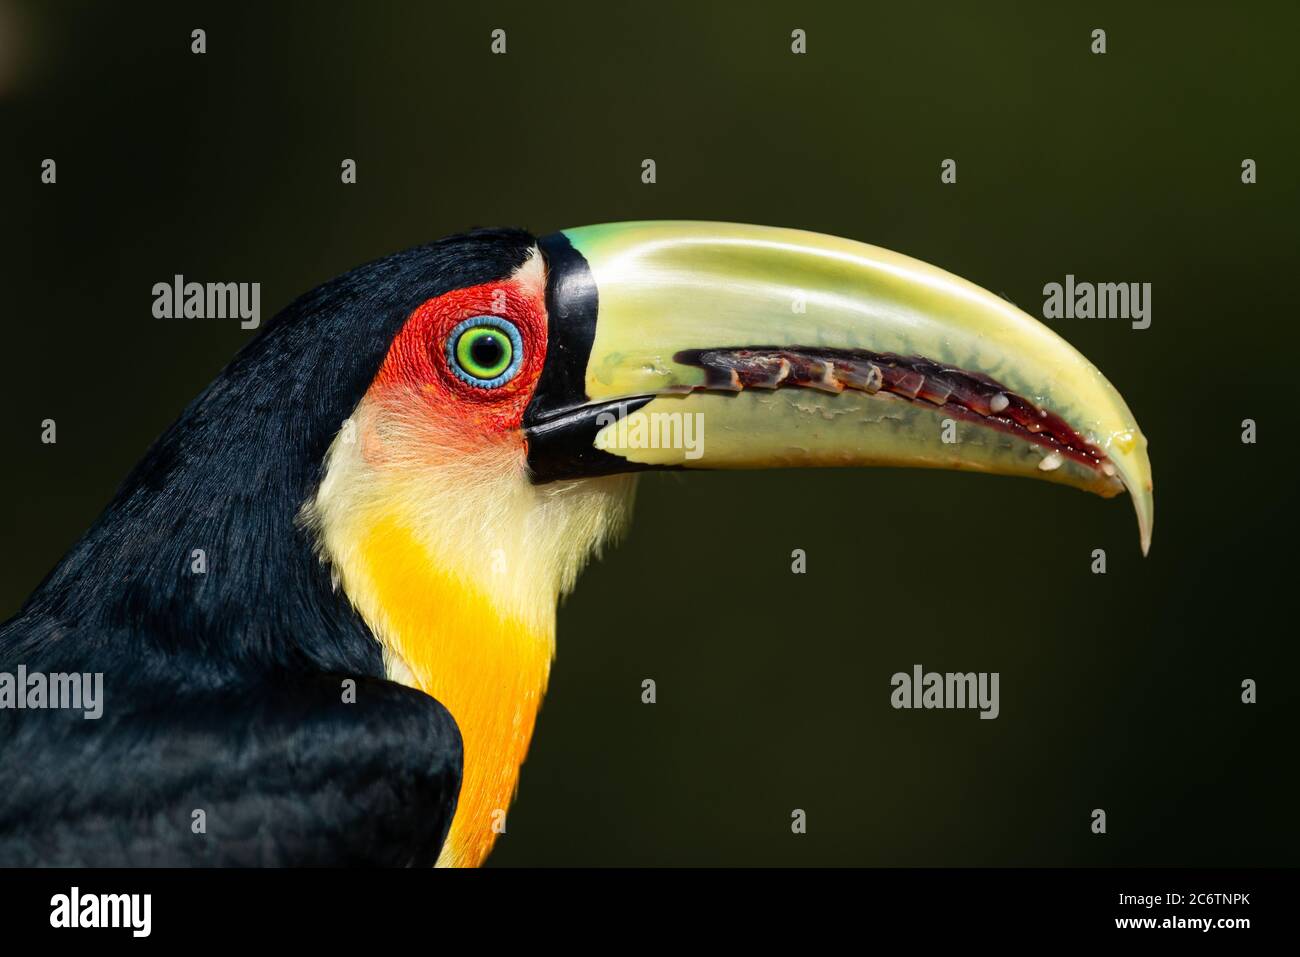 Red-breasted Toucan (Ramphastos dicolorus) Stock Photo